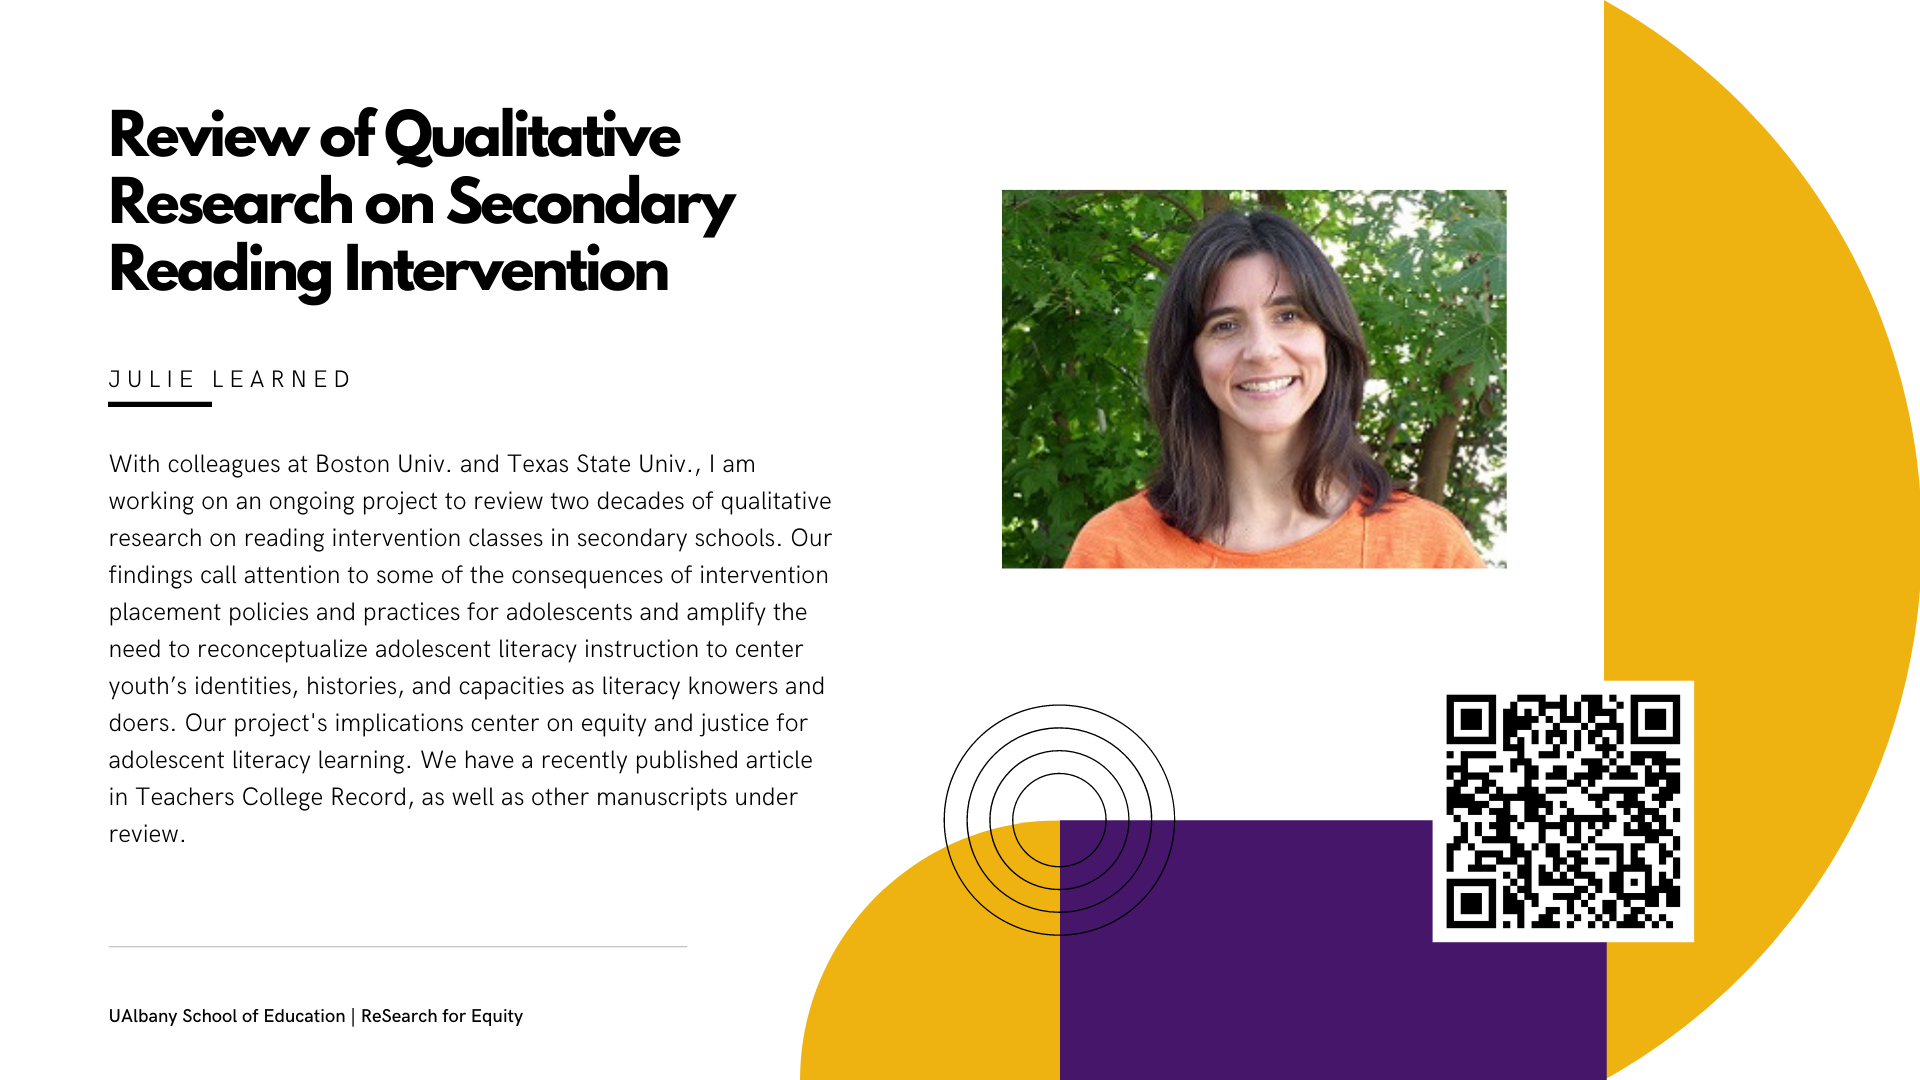 white slide with title and same text as caption, purple and yellow shapes to the right, photo of smiling Julie Learned in an orange top outside, QR code